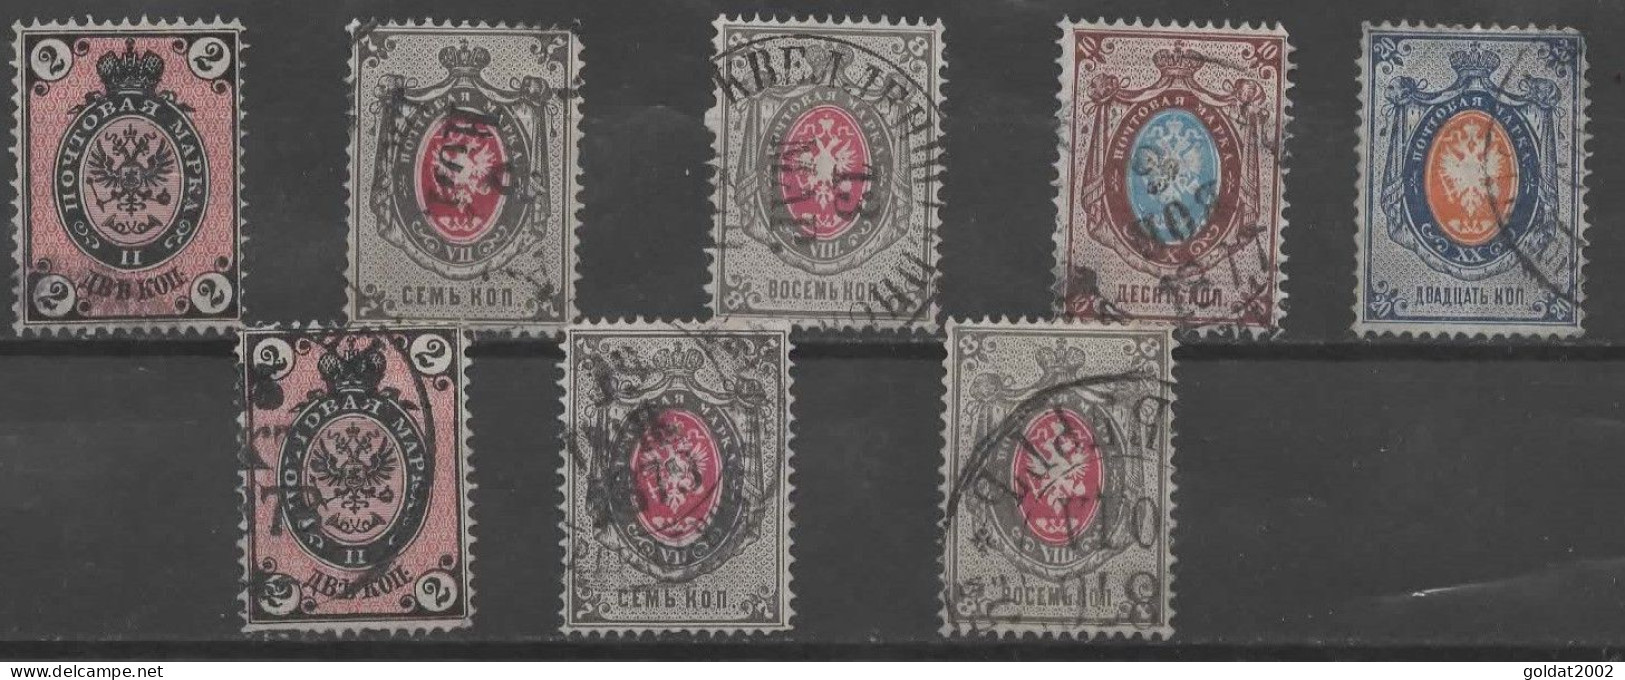 Imperial Russia 1875,Sc # 26-30+Sc #26a,27b,28a,Horiz.+Vertic.laid Paper,Used . - Gebraucht